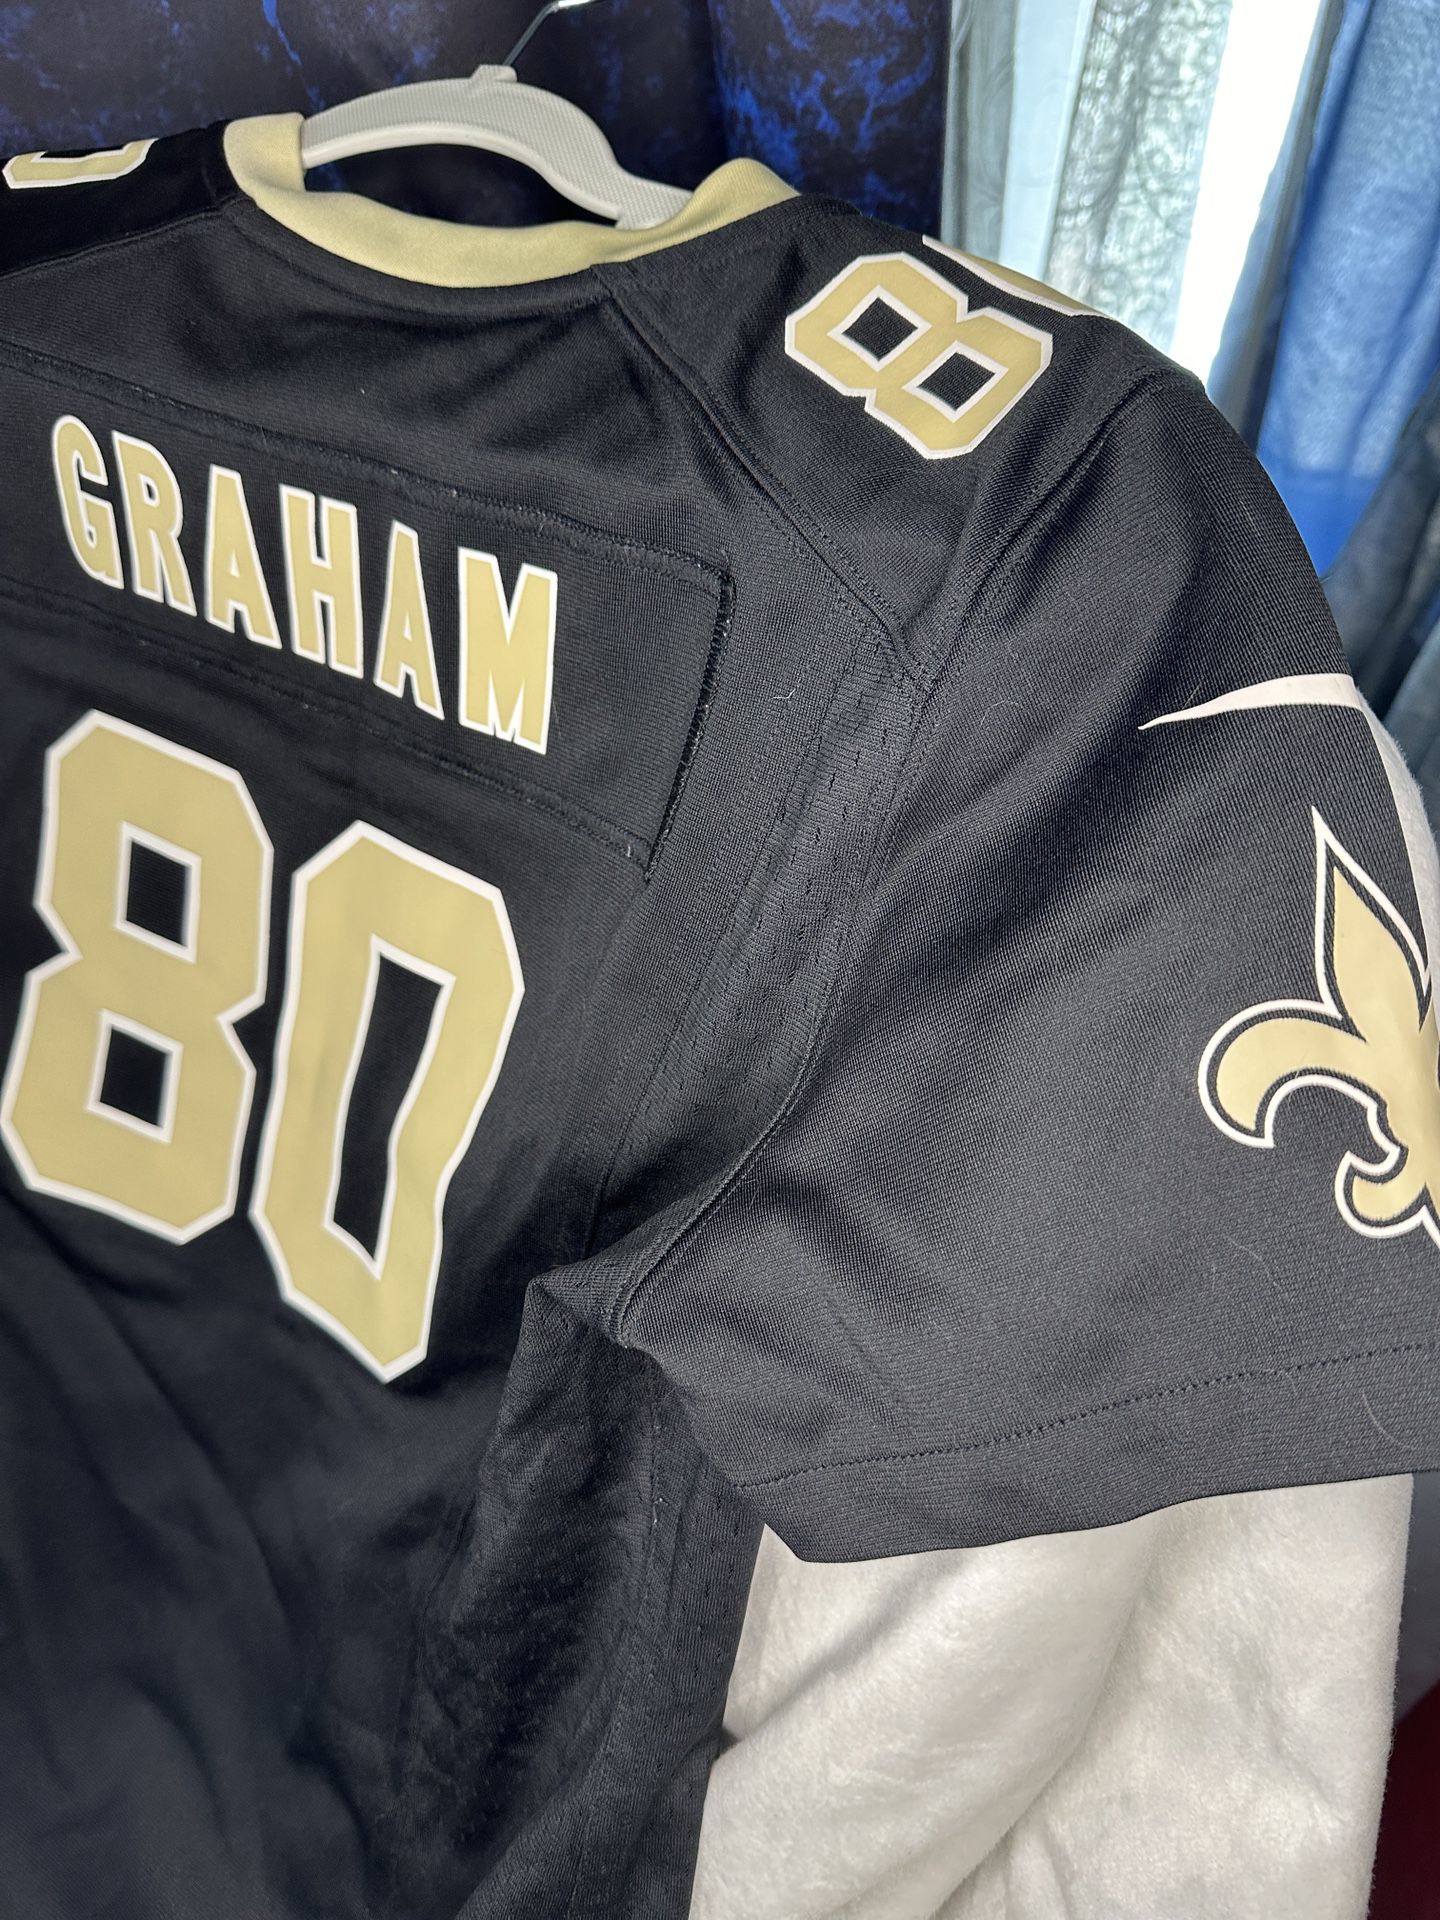 New Orleans Saints - Nike NFL - Jimmy Graham #80 - Limited Game Jersey Authentic